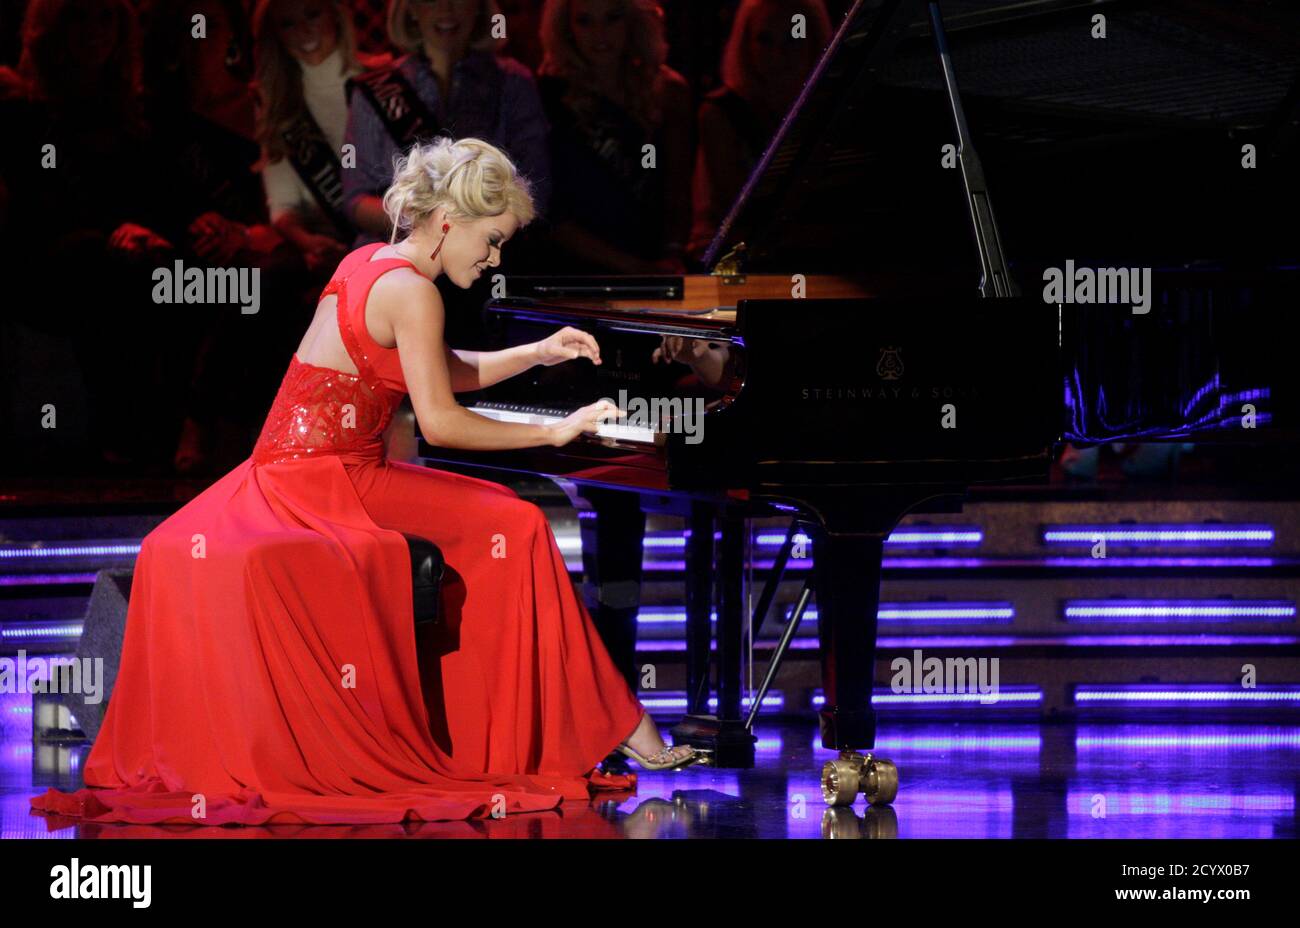 Miss Nebraska Teresa Scanlan, 17, plays the piano during the talent portion of the Miss America Pageant in the Theatre for the Performing Arts at the Planet Hollywood Resort and Casino in Las Vegas, Nevada, January 15, 2011. Scanlan was later crowned Miss America 2011. REUTERS/Steve Marcus (UNITED STATES - Tags: ENTERTAINMENT) Stock Photo